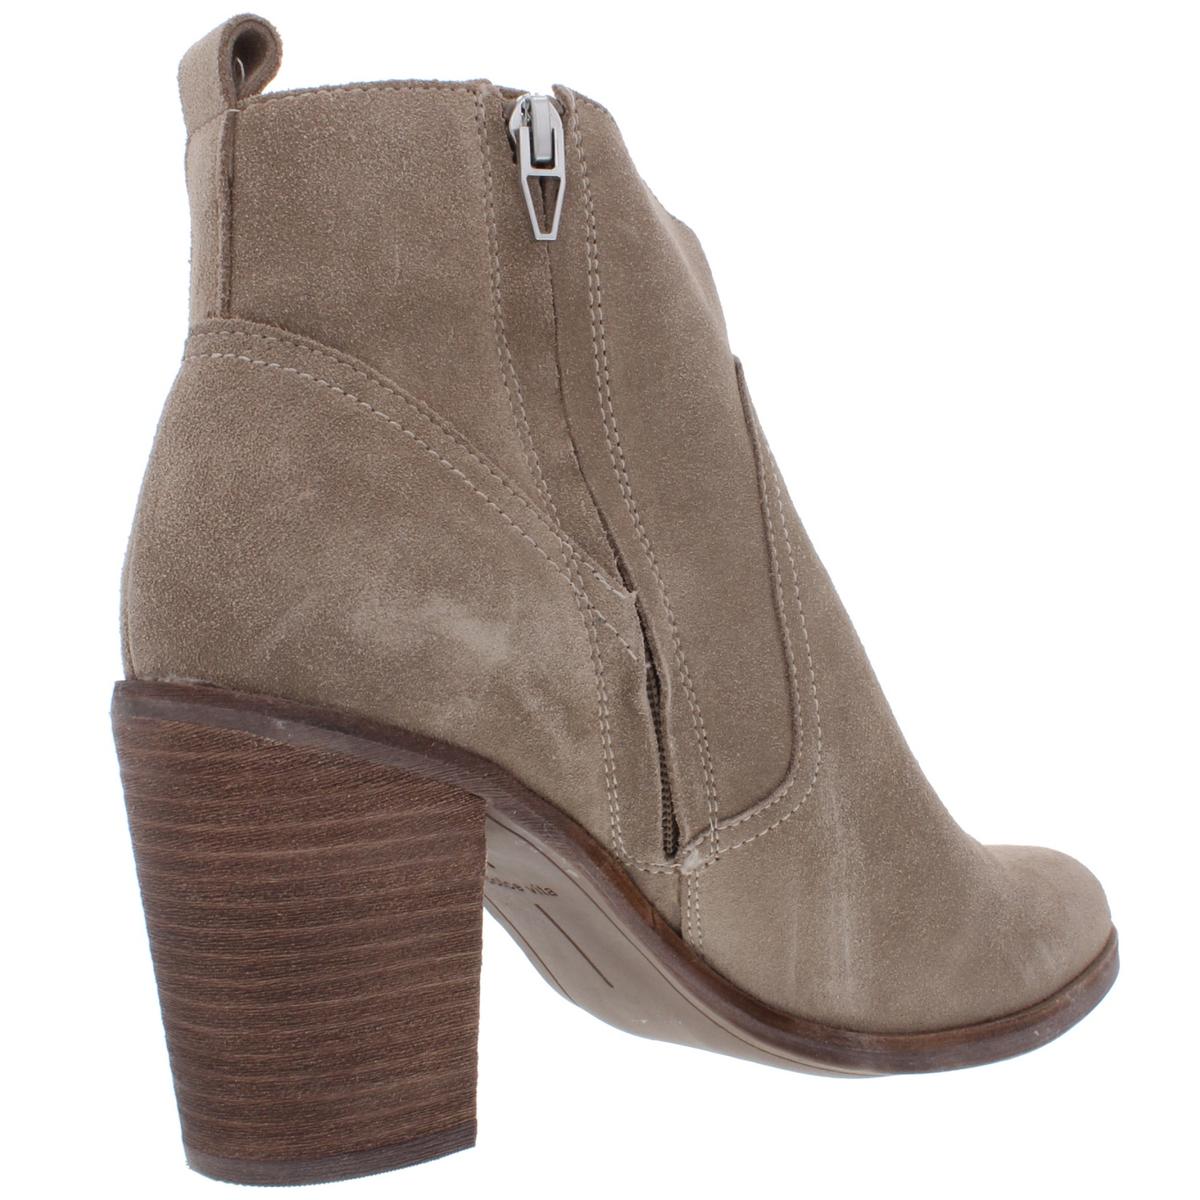 Dolce Vita Womens Saint Suede Ankle Stacked Booties Shoes BHFO 0142 | eBay